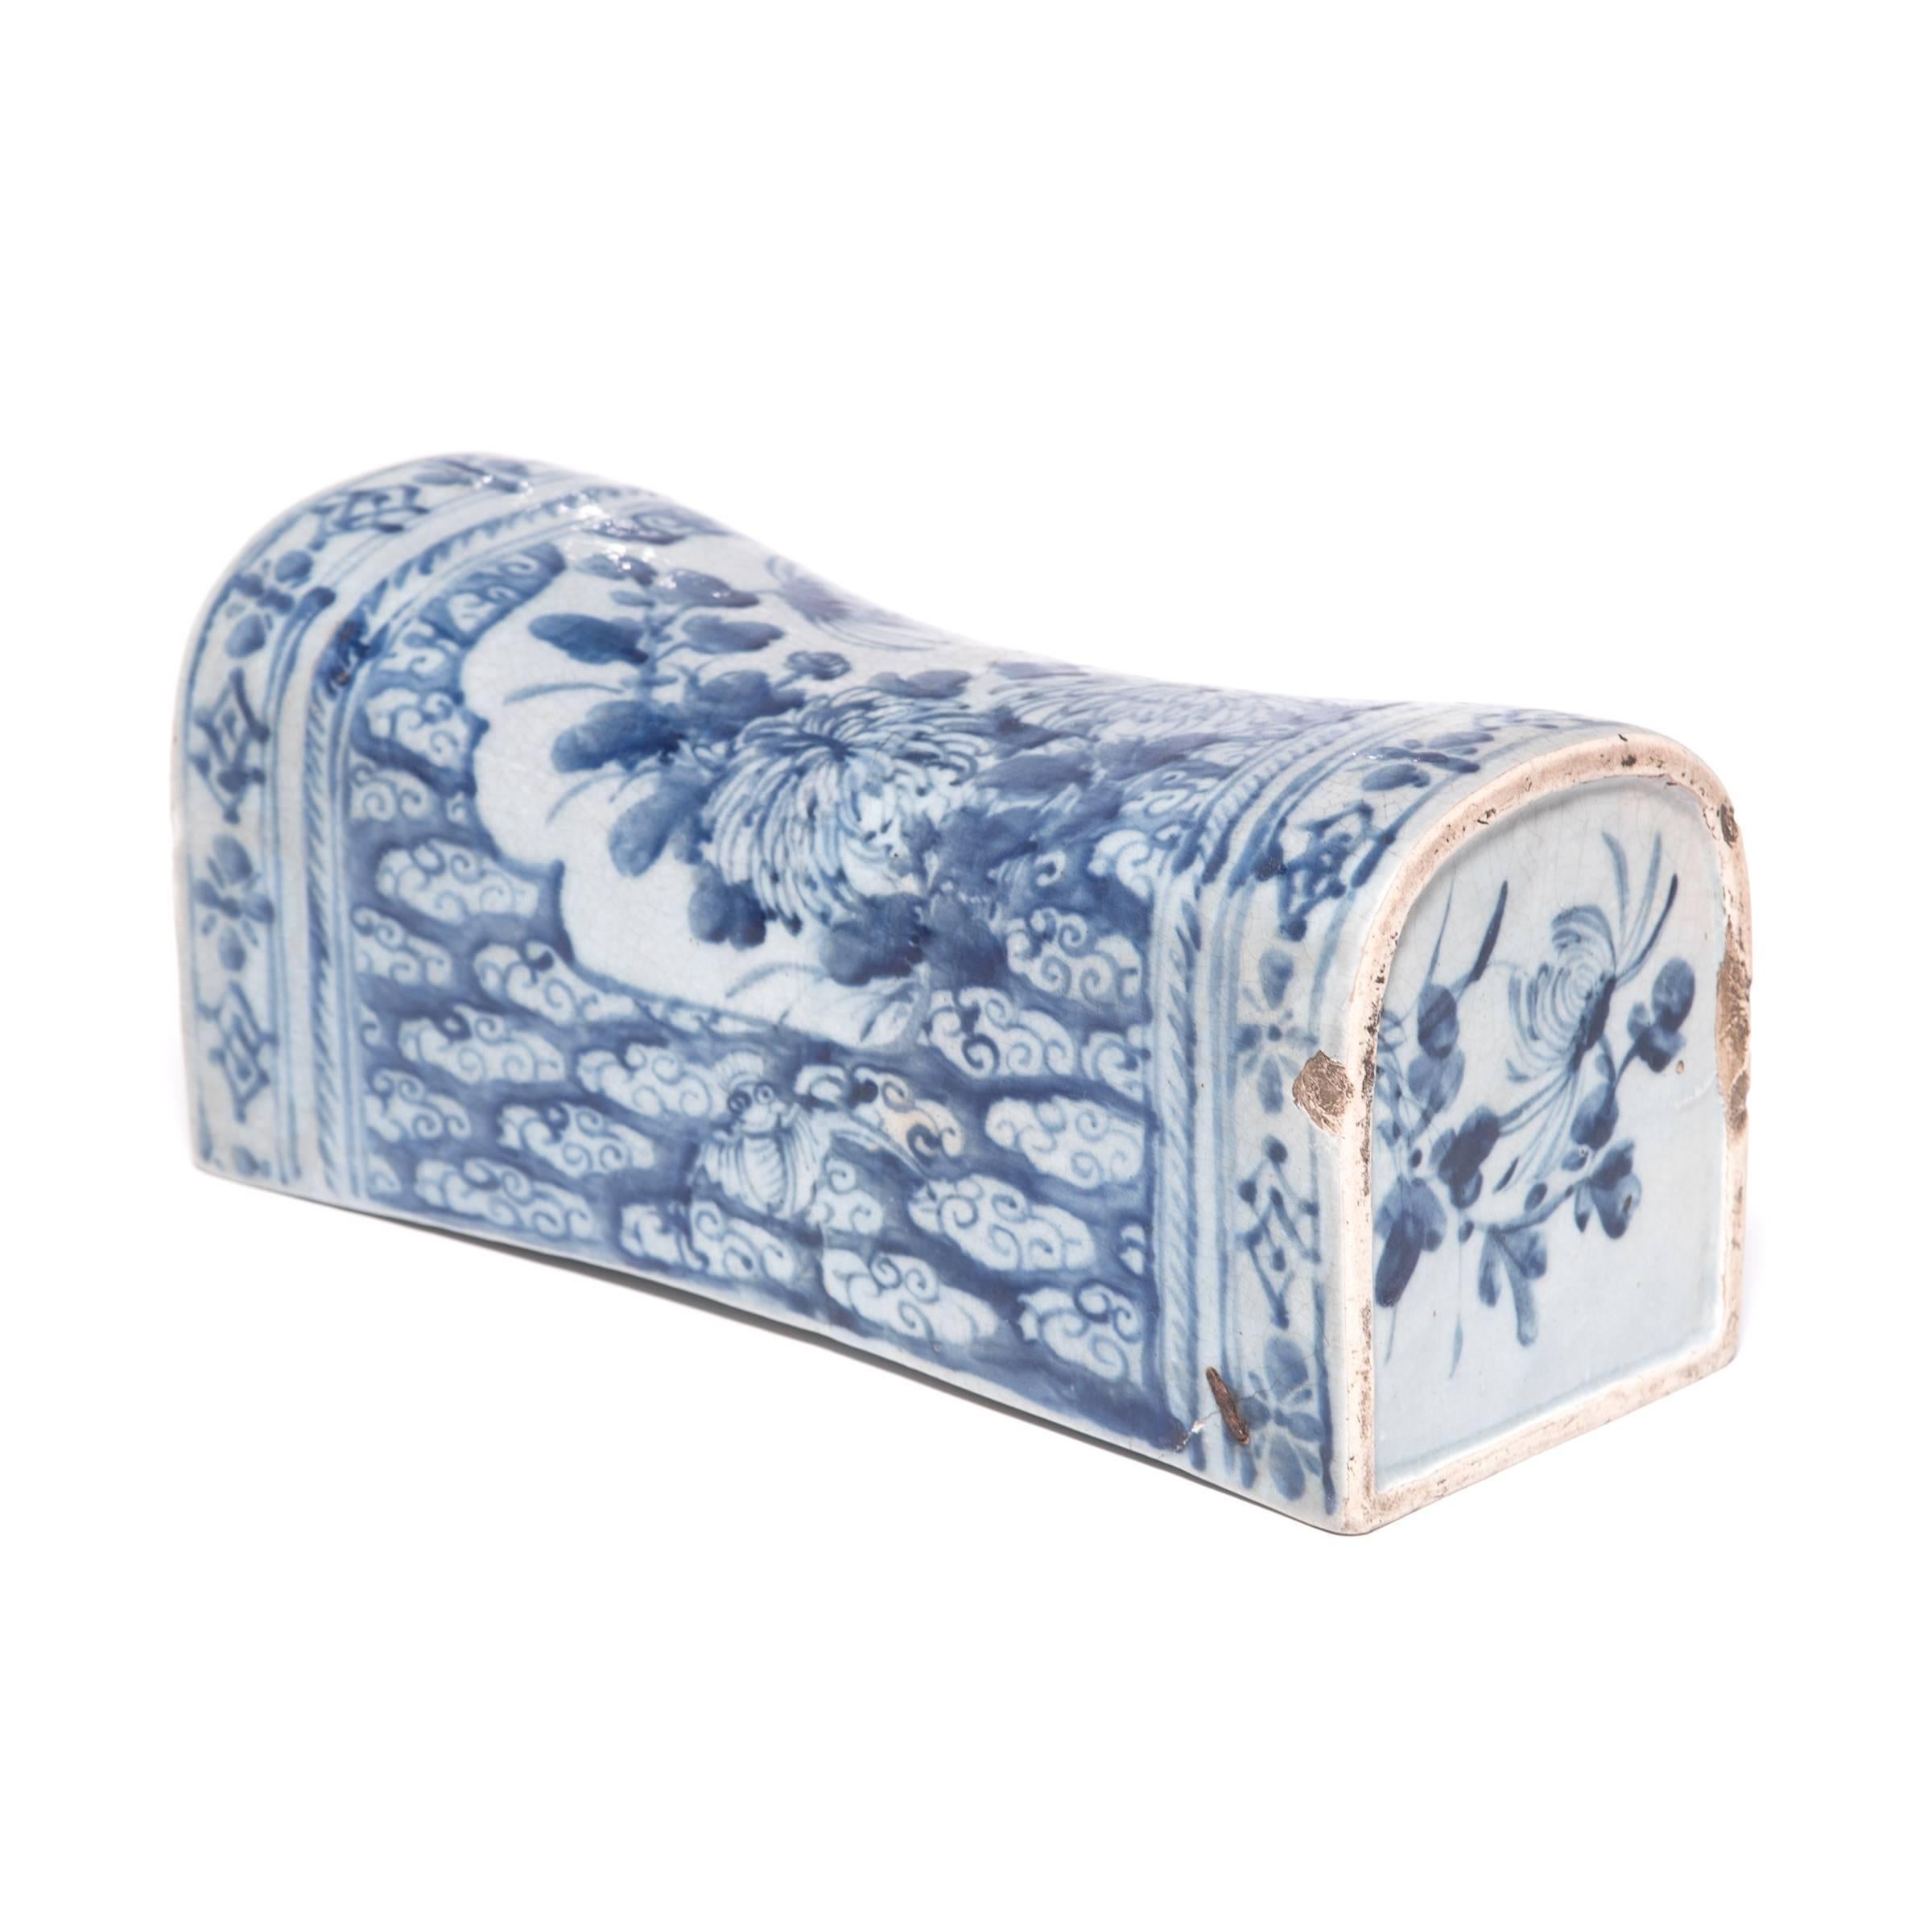 We call this Qing-dynasty neck pillow “Broken Dreams” not for the restlessness one might experience with such a hard headrest but for the 19th century restoration that enhances its age and character. Dealing with what could have been an irreparable